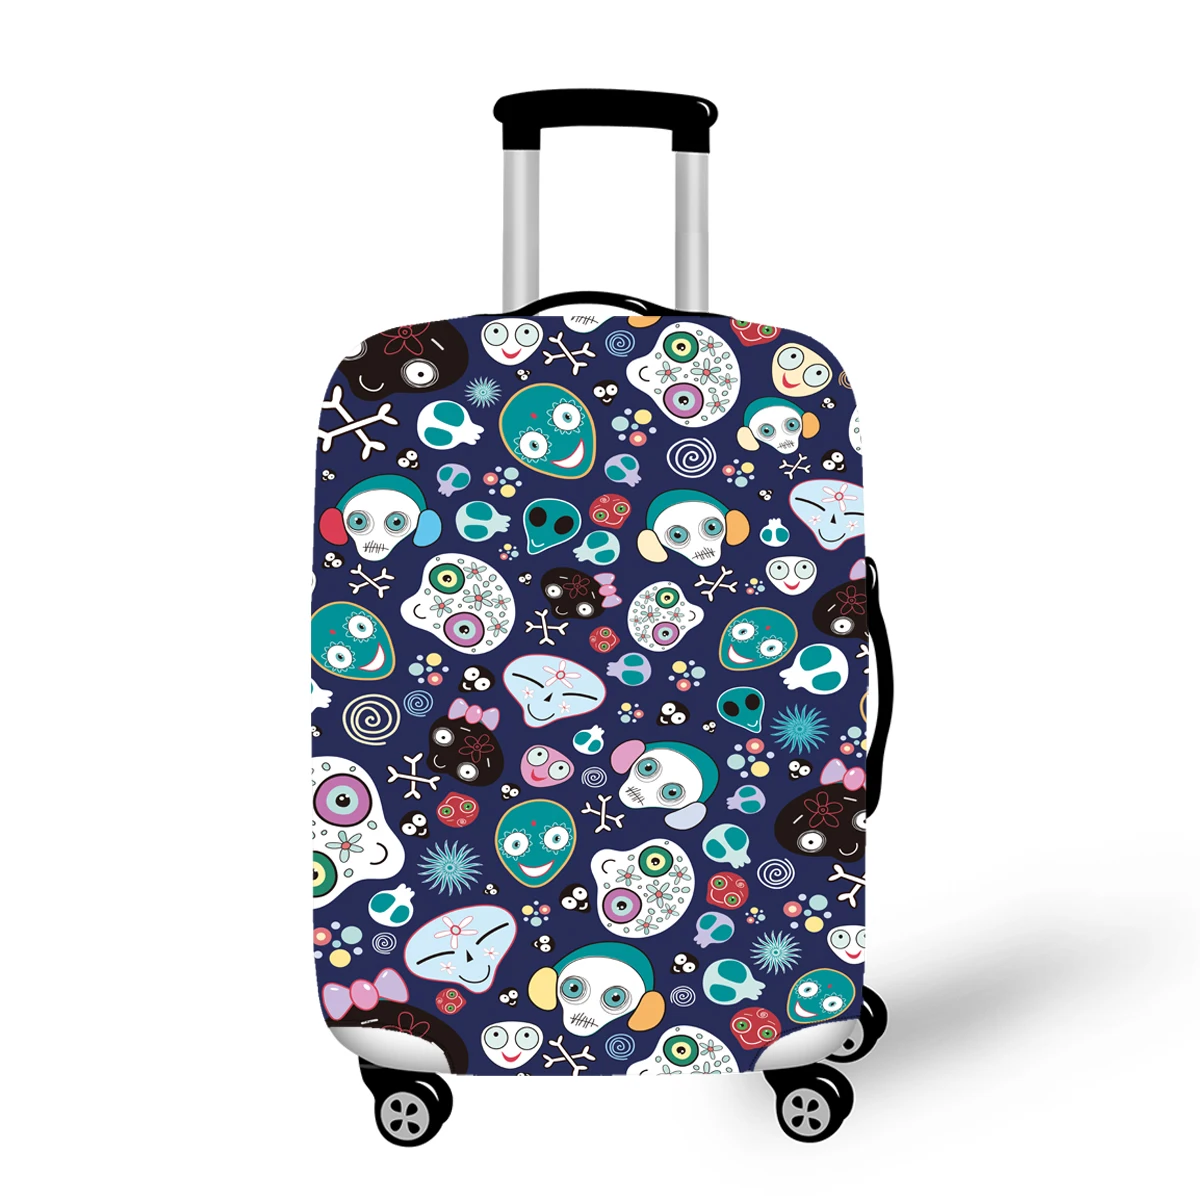 

Polyester luggage cover elastic skull design print custom luggage cover with zipper sublimation luggage covers for suitcase, Full printing color